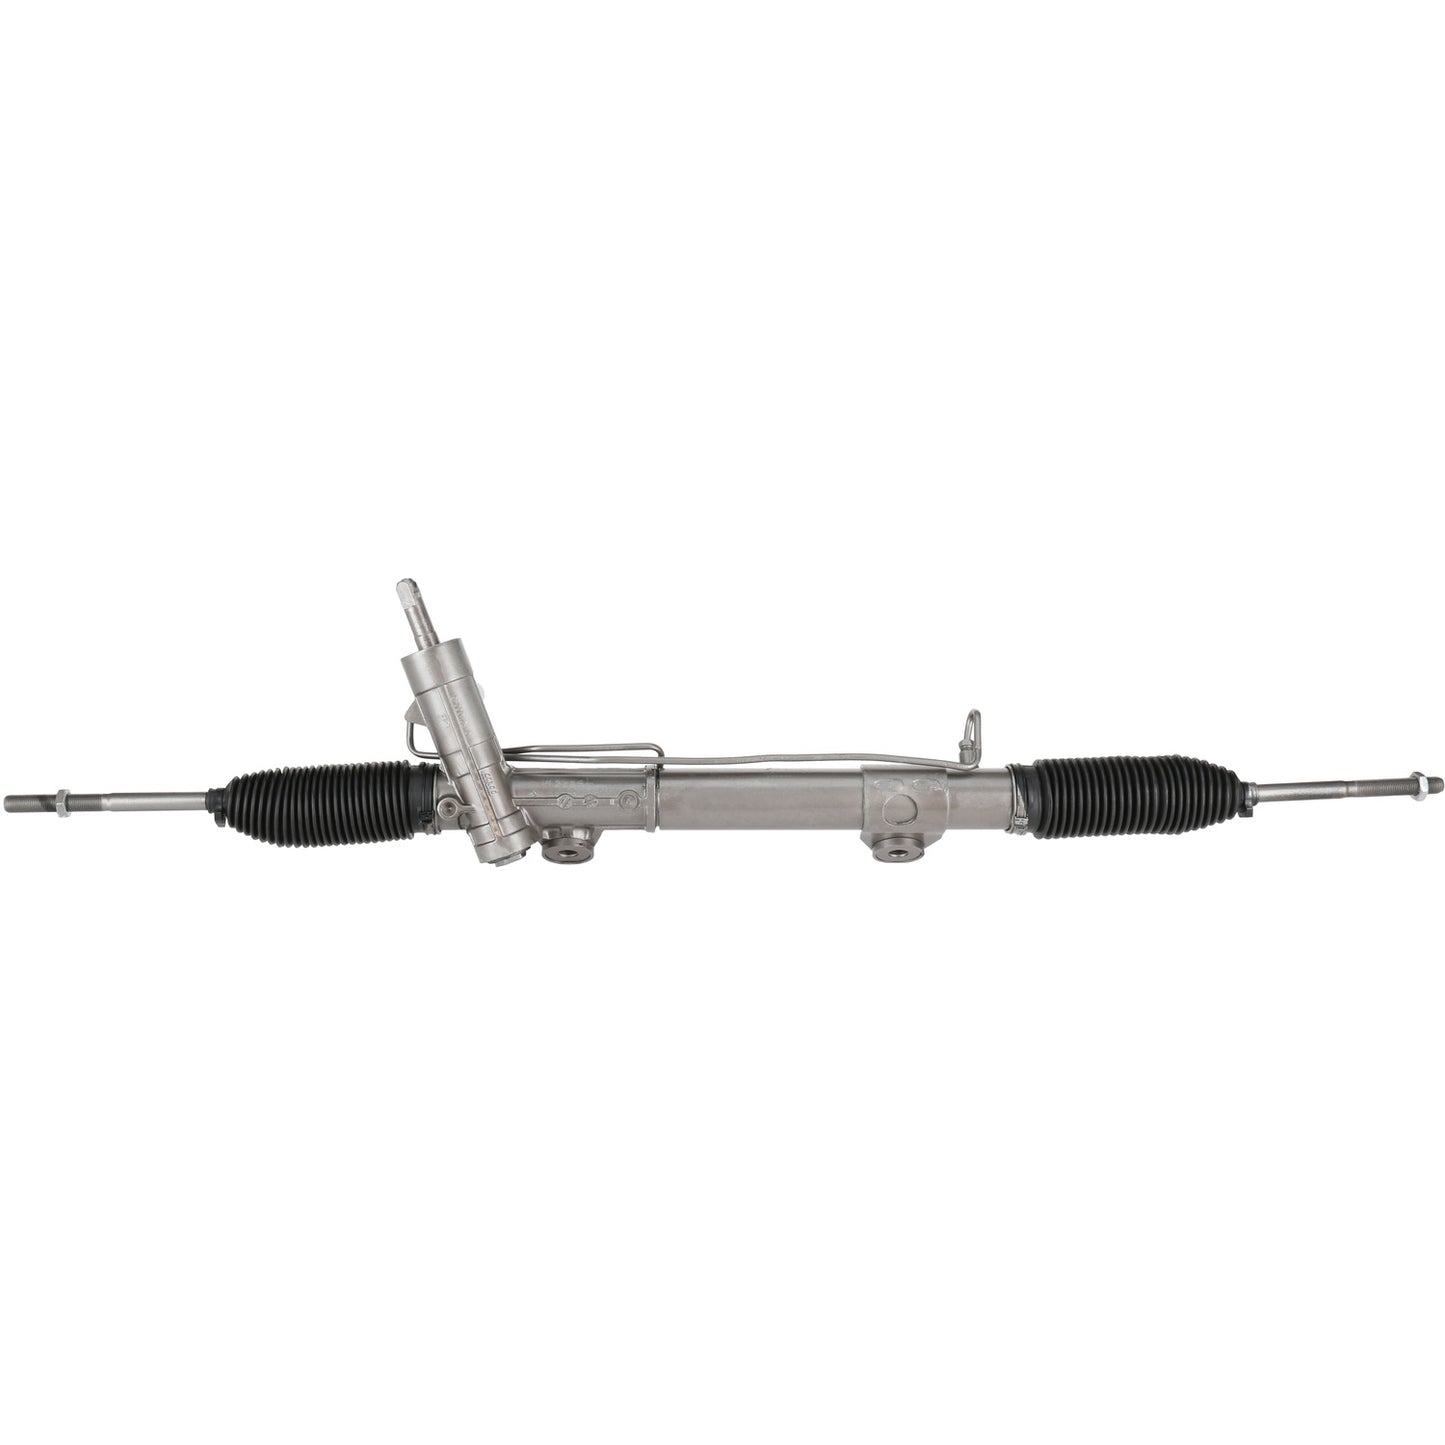 Rack and Pinion Assembly - MAVAL - Hydraulic Power - Remanufactured - 95326M